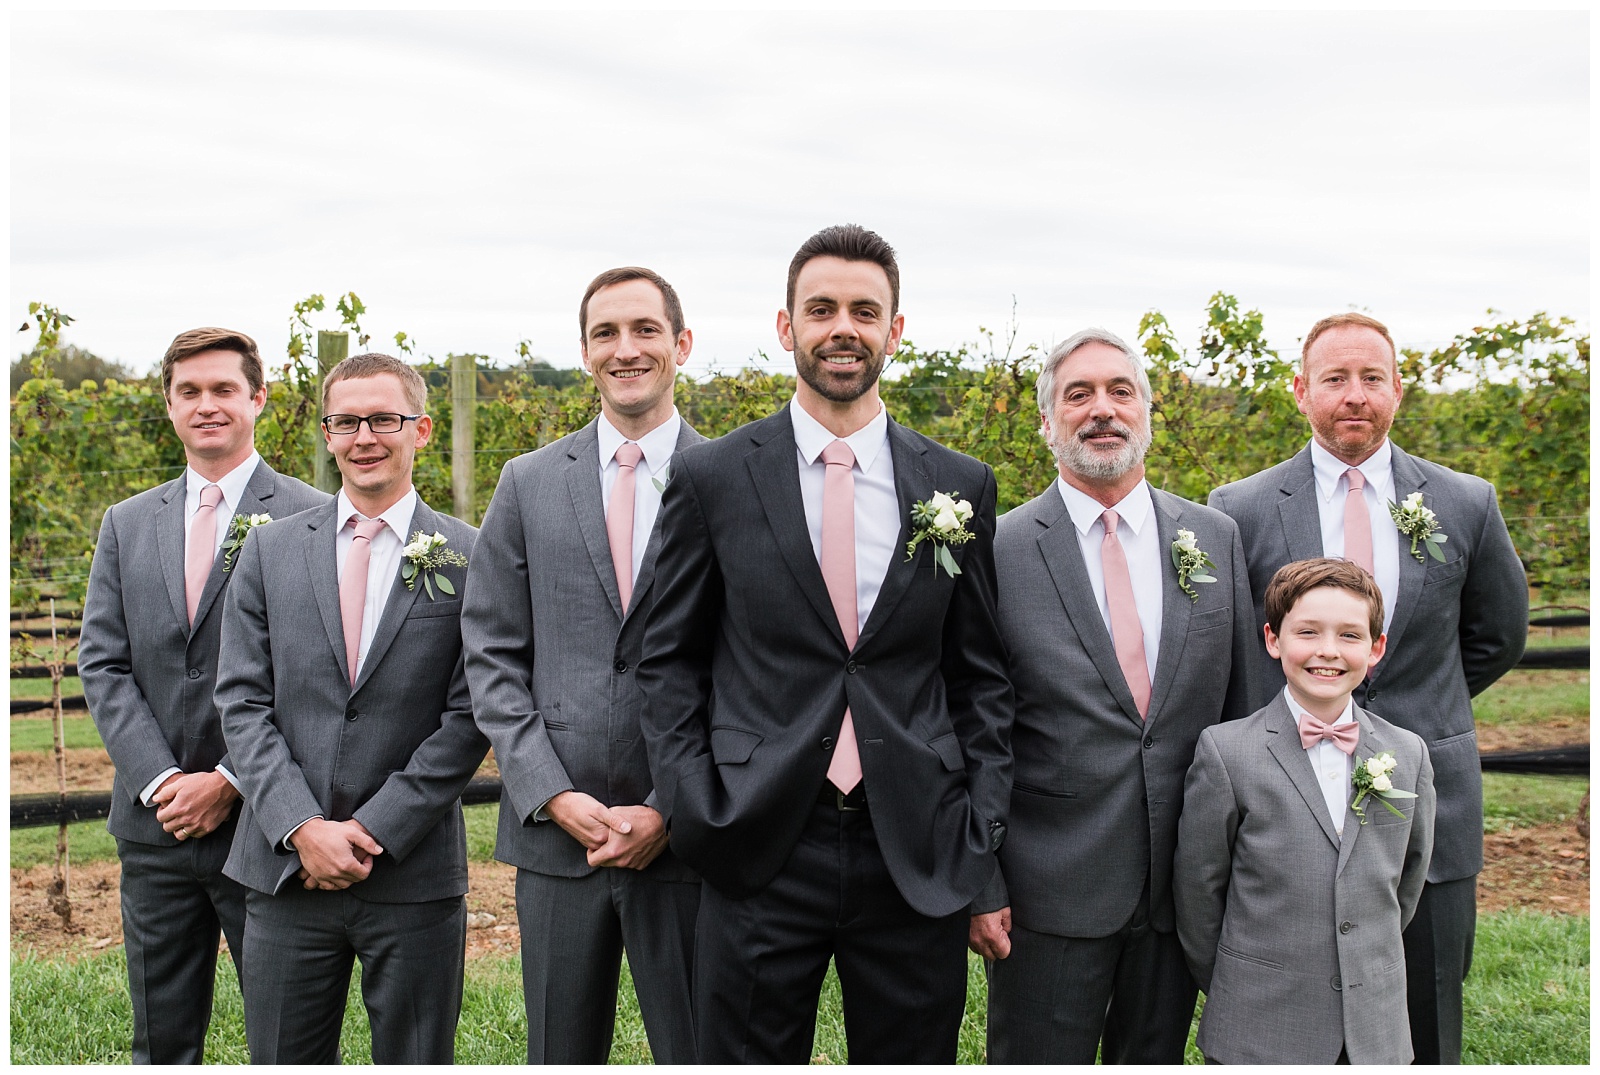 Grooms wedding party stands in front of the vines at childress vineyards weddings and events